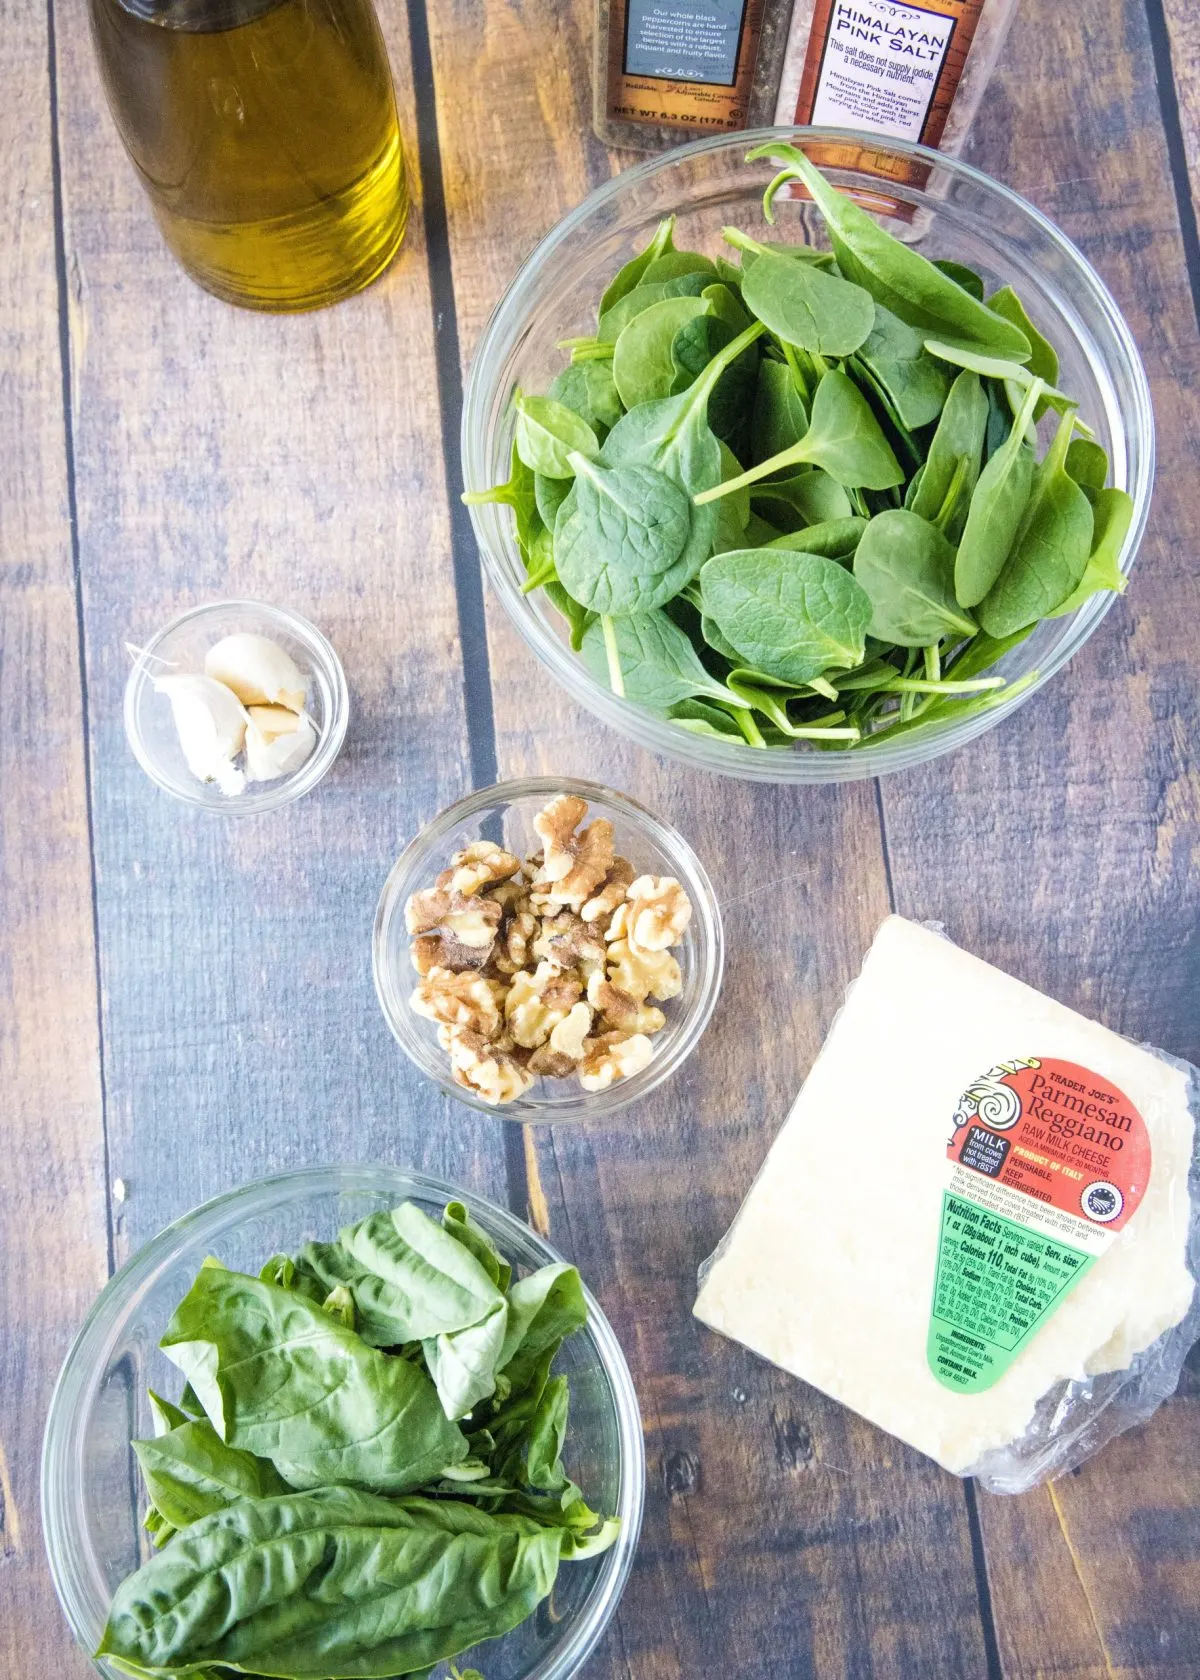 Overhead view of the ingredients needed for spinach pesto: a bowl of spinach, a bowl of basil, a bowl of walnuts, a bowl of garlic, a jar of olive oil, a block of parmesan cheese, and containers of salt and pepper